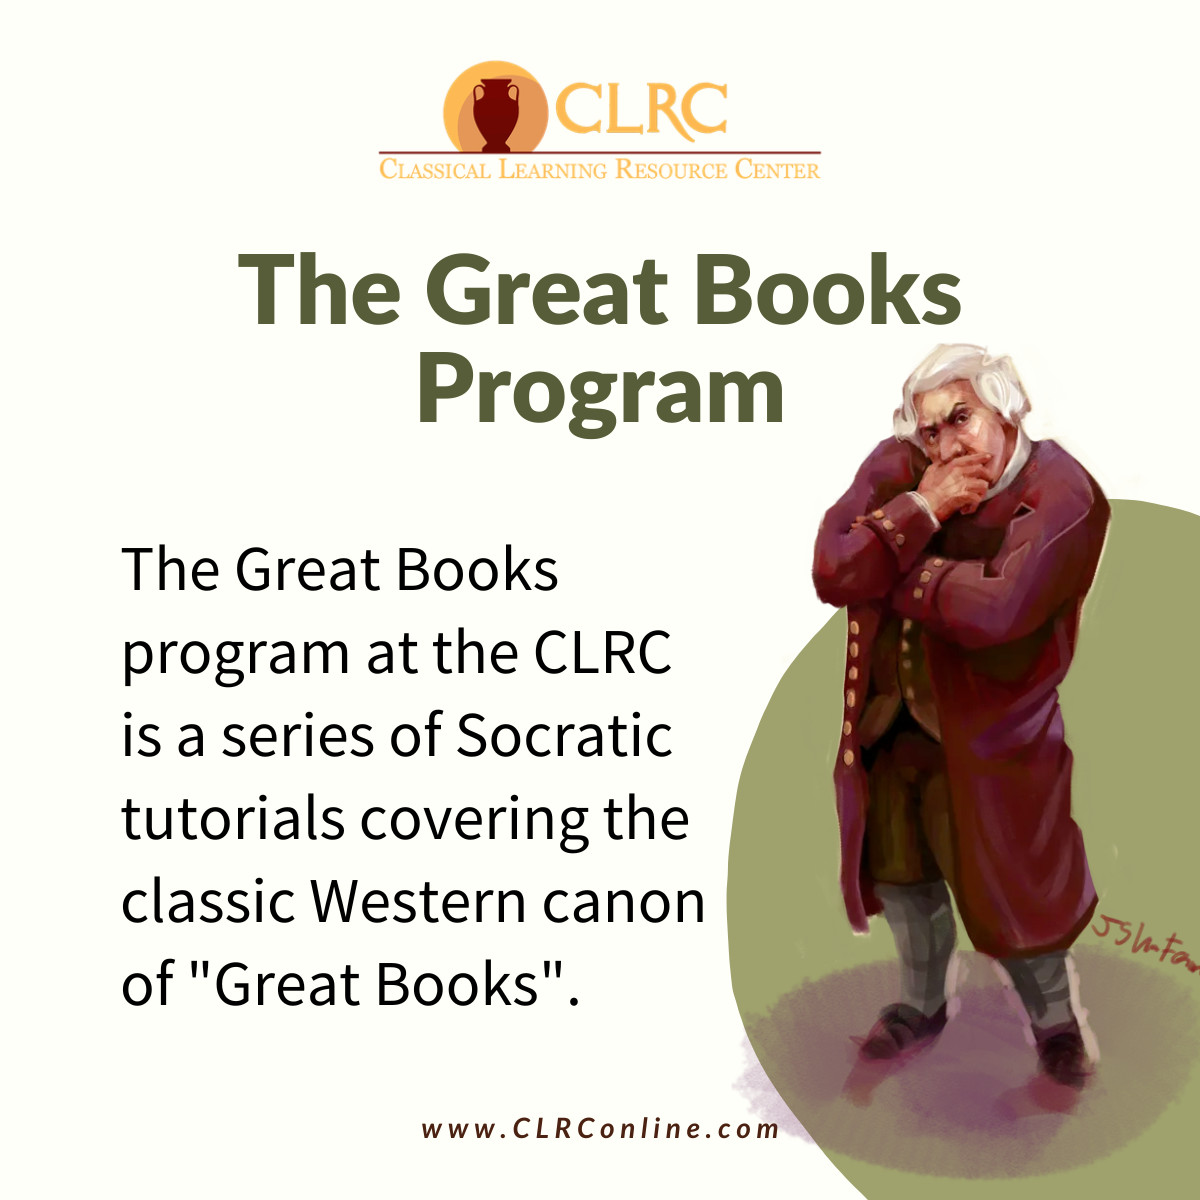 Dive deep into Socratic tutorials covering the classic Western canon of 'Great Books.' #CLRConline Great Books courses emphasize the writing process with extensive feedback addressing individual writing challenges.

#classicaleducation #GreatBooks #classicalliterature #literature